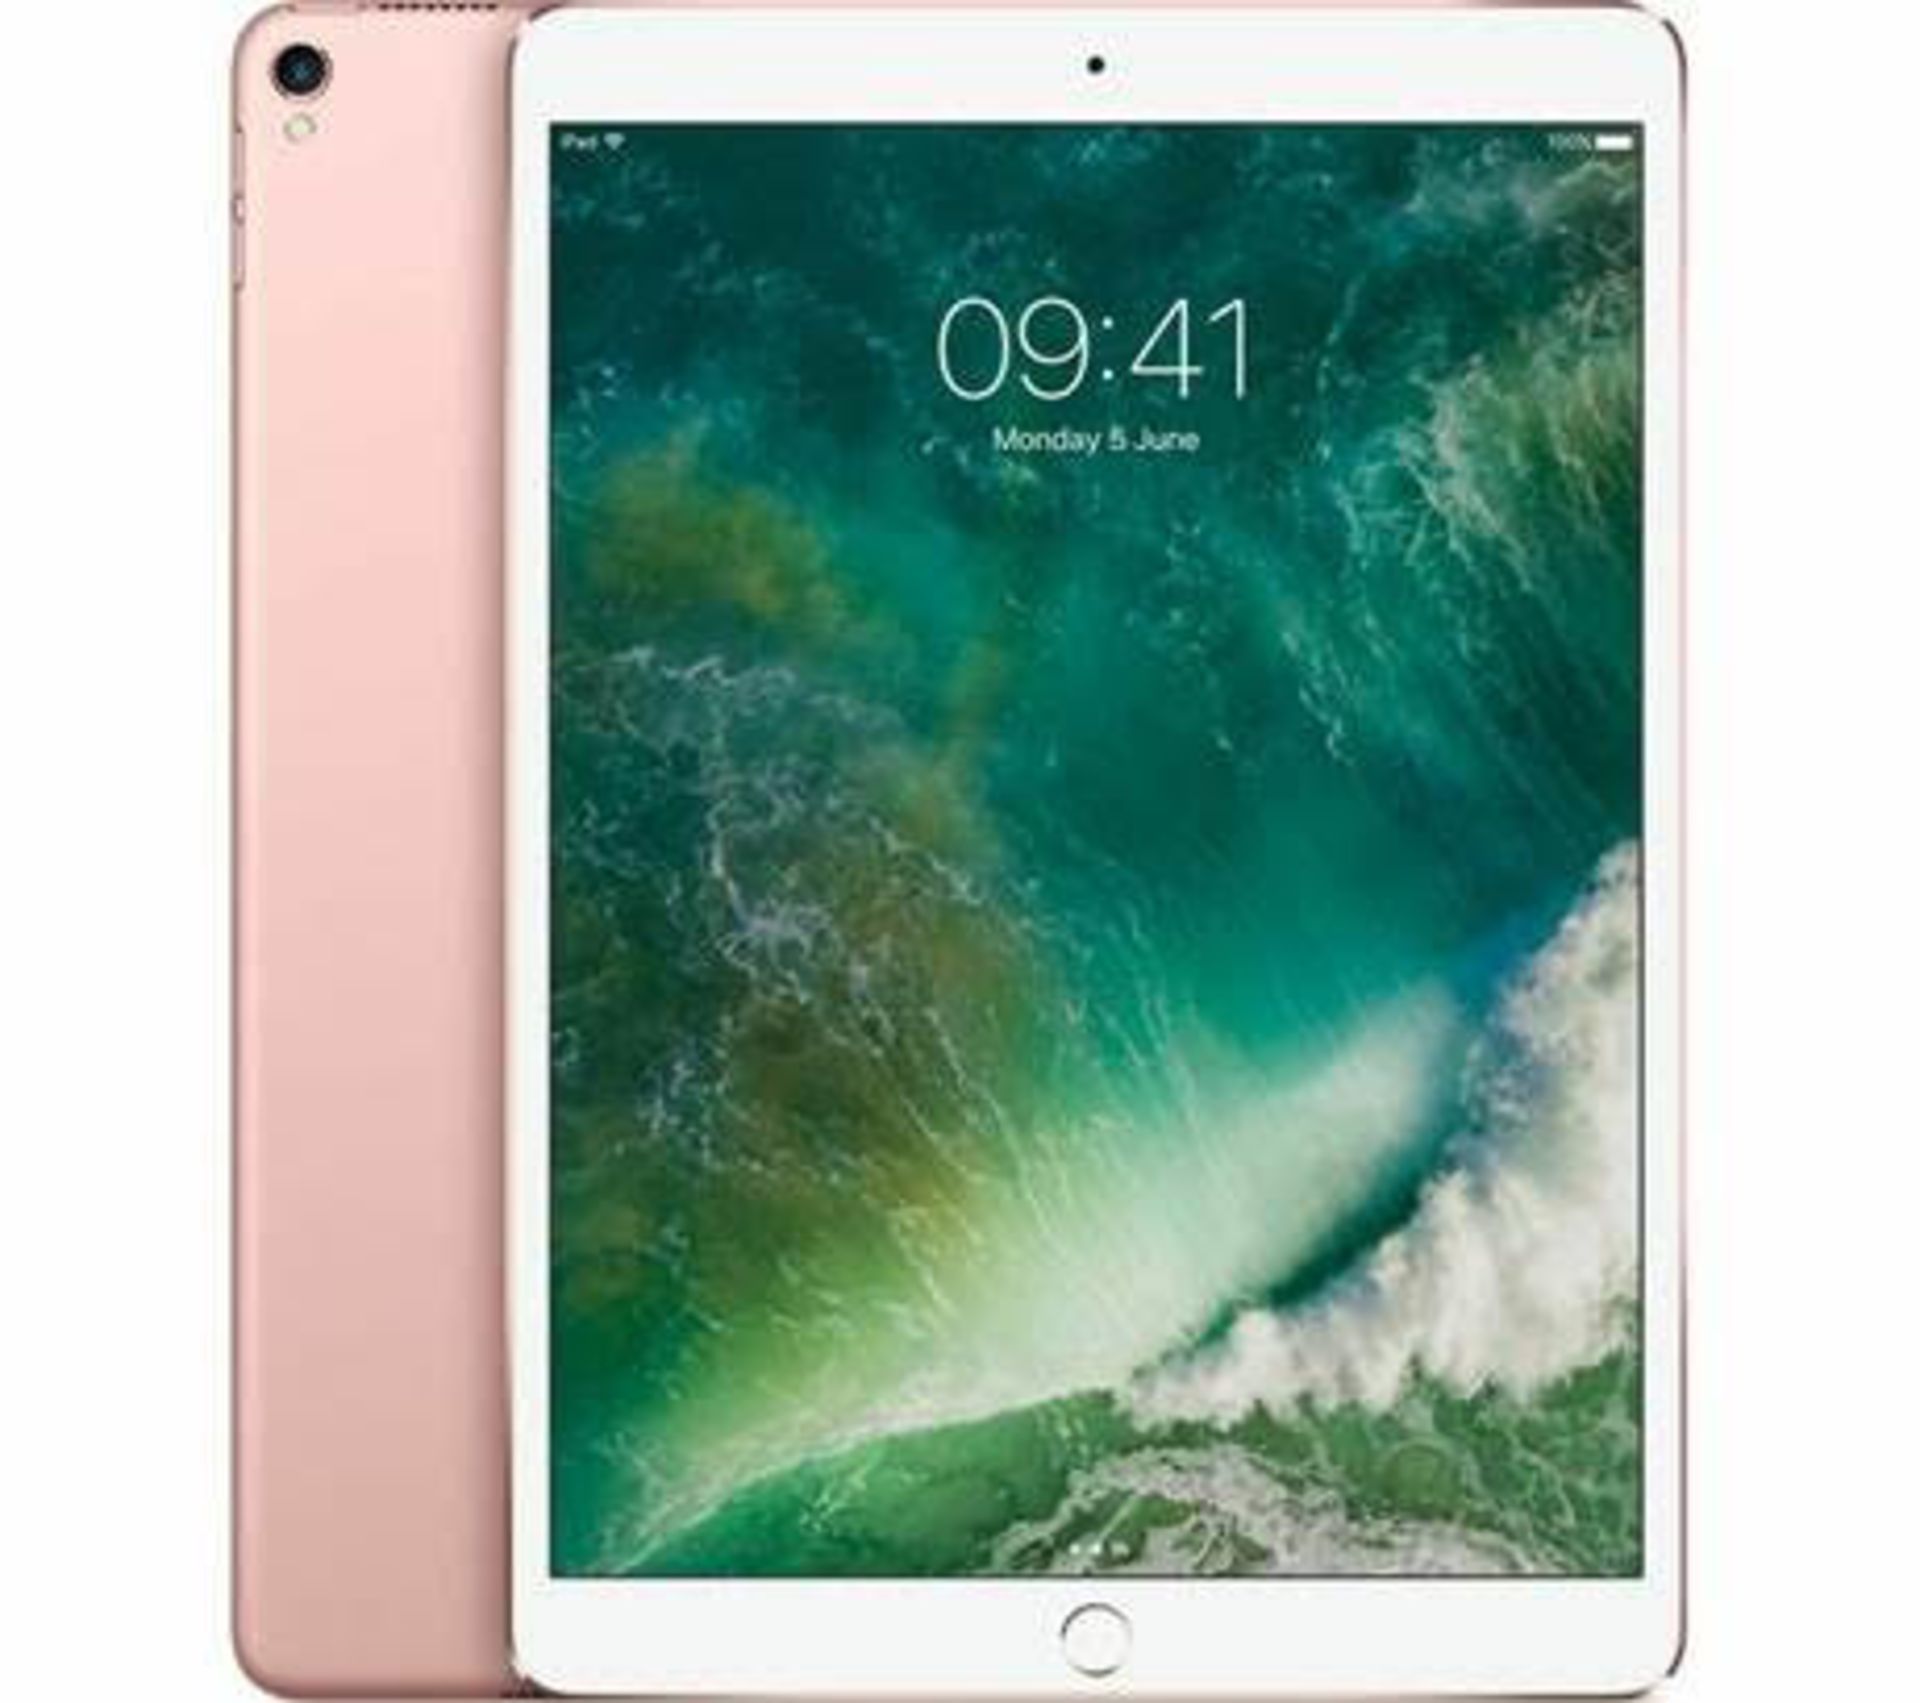 V Grade A Apple Ipad Pro 10.5 Inch 64GB - Rose Gold - With Retail Box